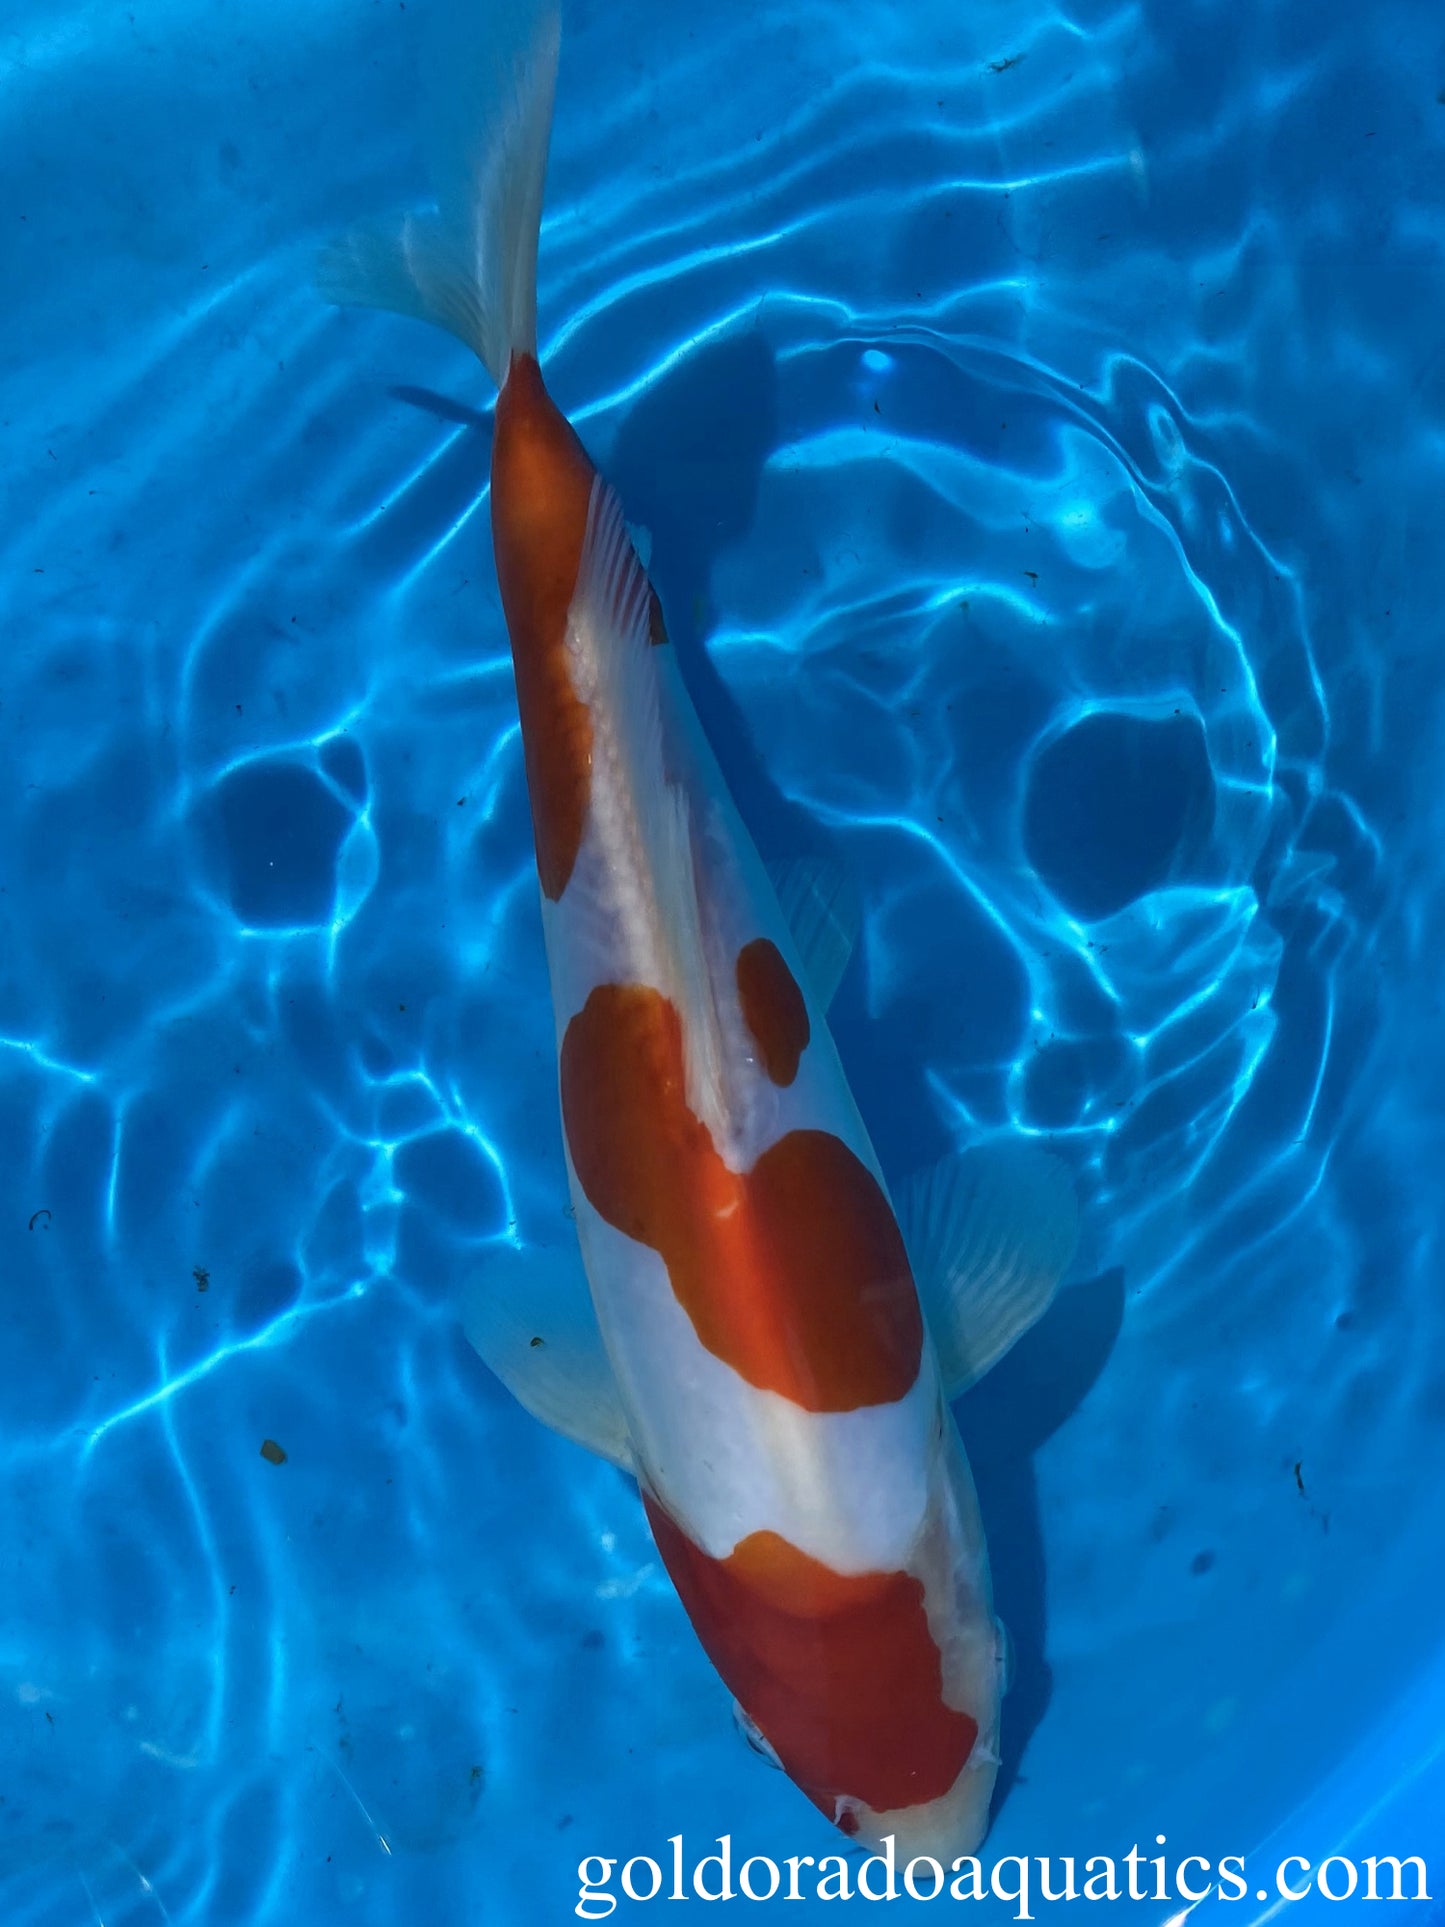 Image of a Kohaku koi fish. A fish consisting of a white base with red patterns and scaleless skin.